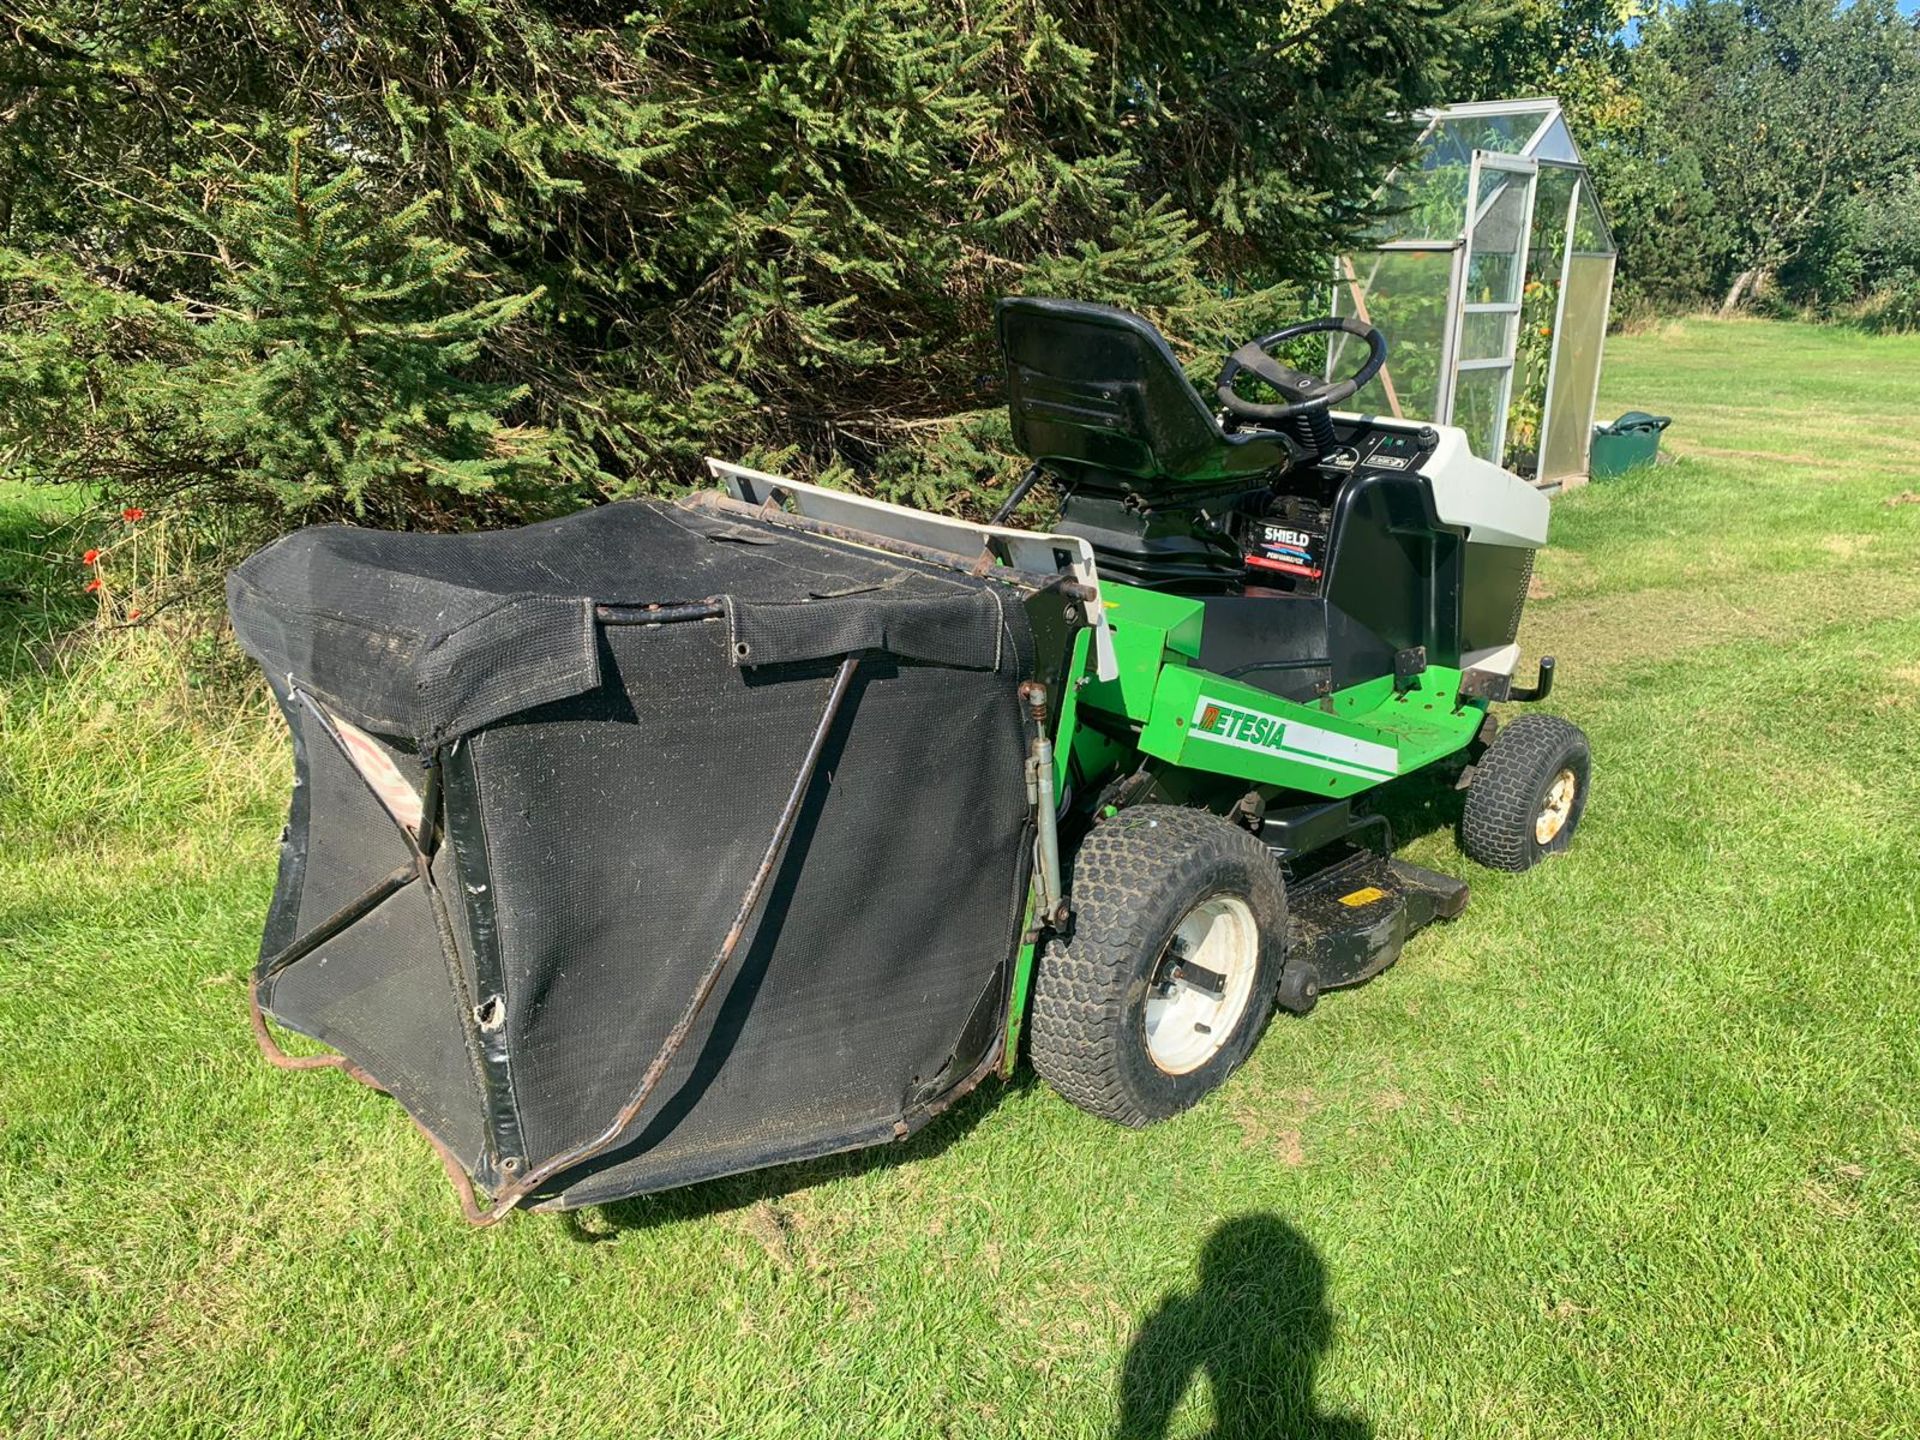 ETESIA MVEHH HYDRO RIDE ON LAWN MOWER C/W REAR GRASS COLLECTOR, RUNS, WORKS AND CUTS *PLUS VAT* - Image 9 of 16